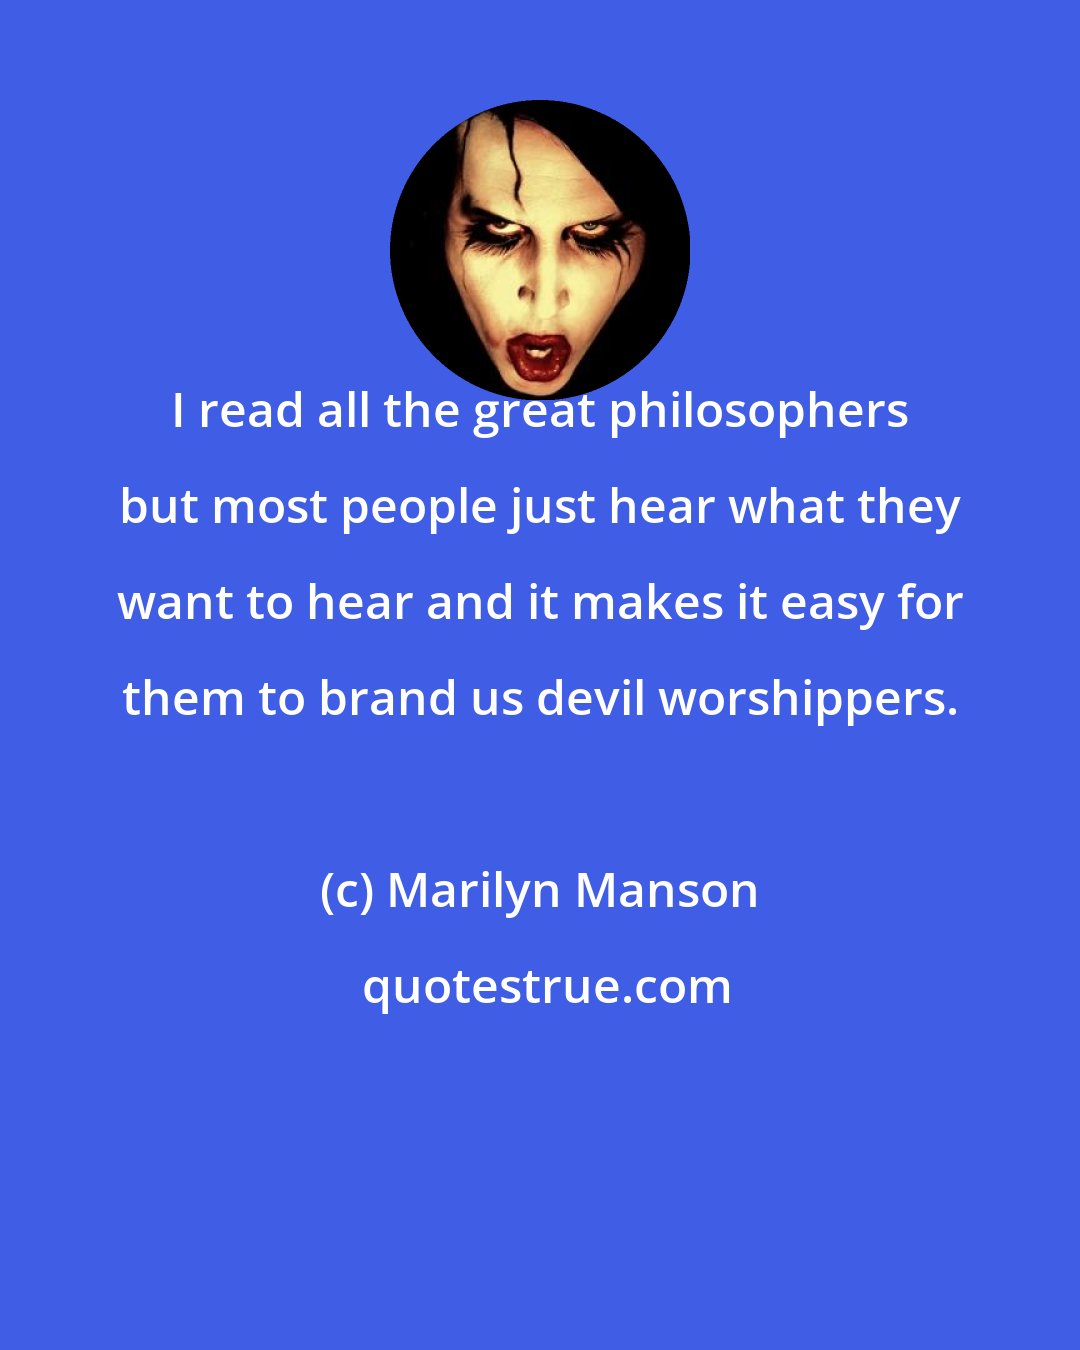 Marilyn Manson: I read all the great philosophers but most people just hear what they want to hear and it makes it easy for them to brand us devil worshippers.